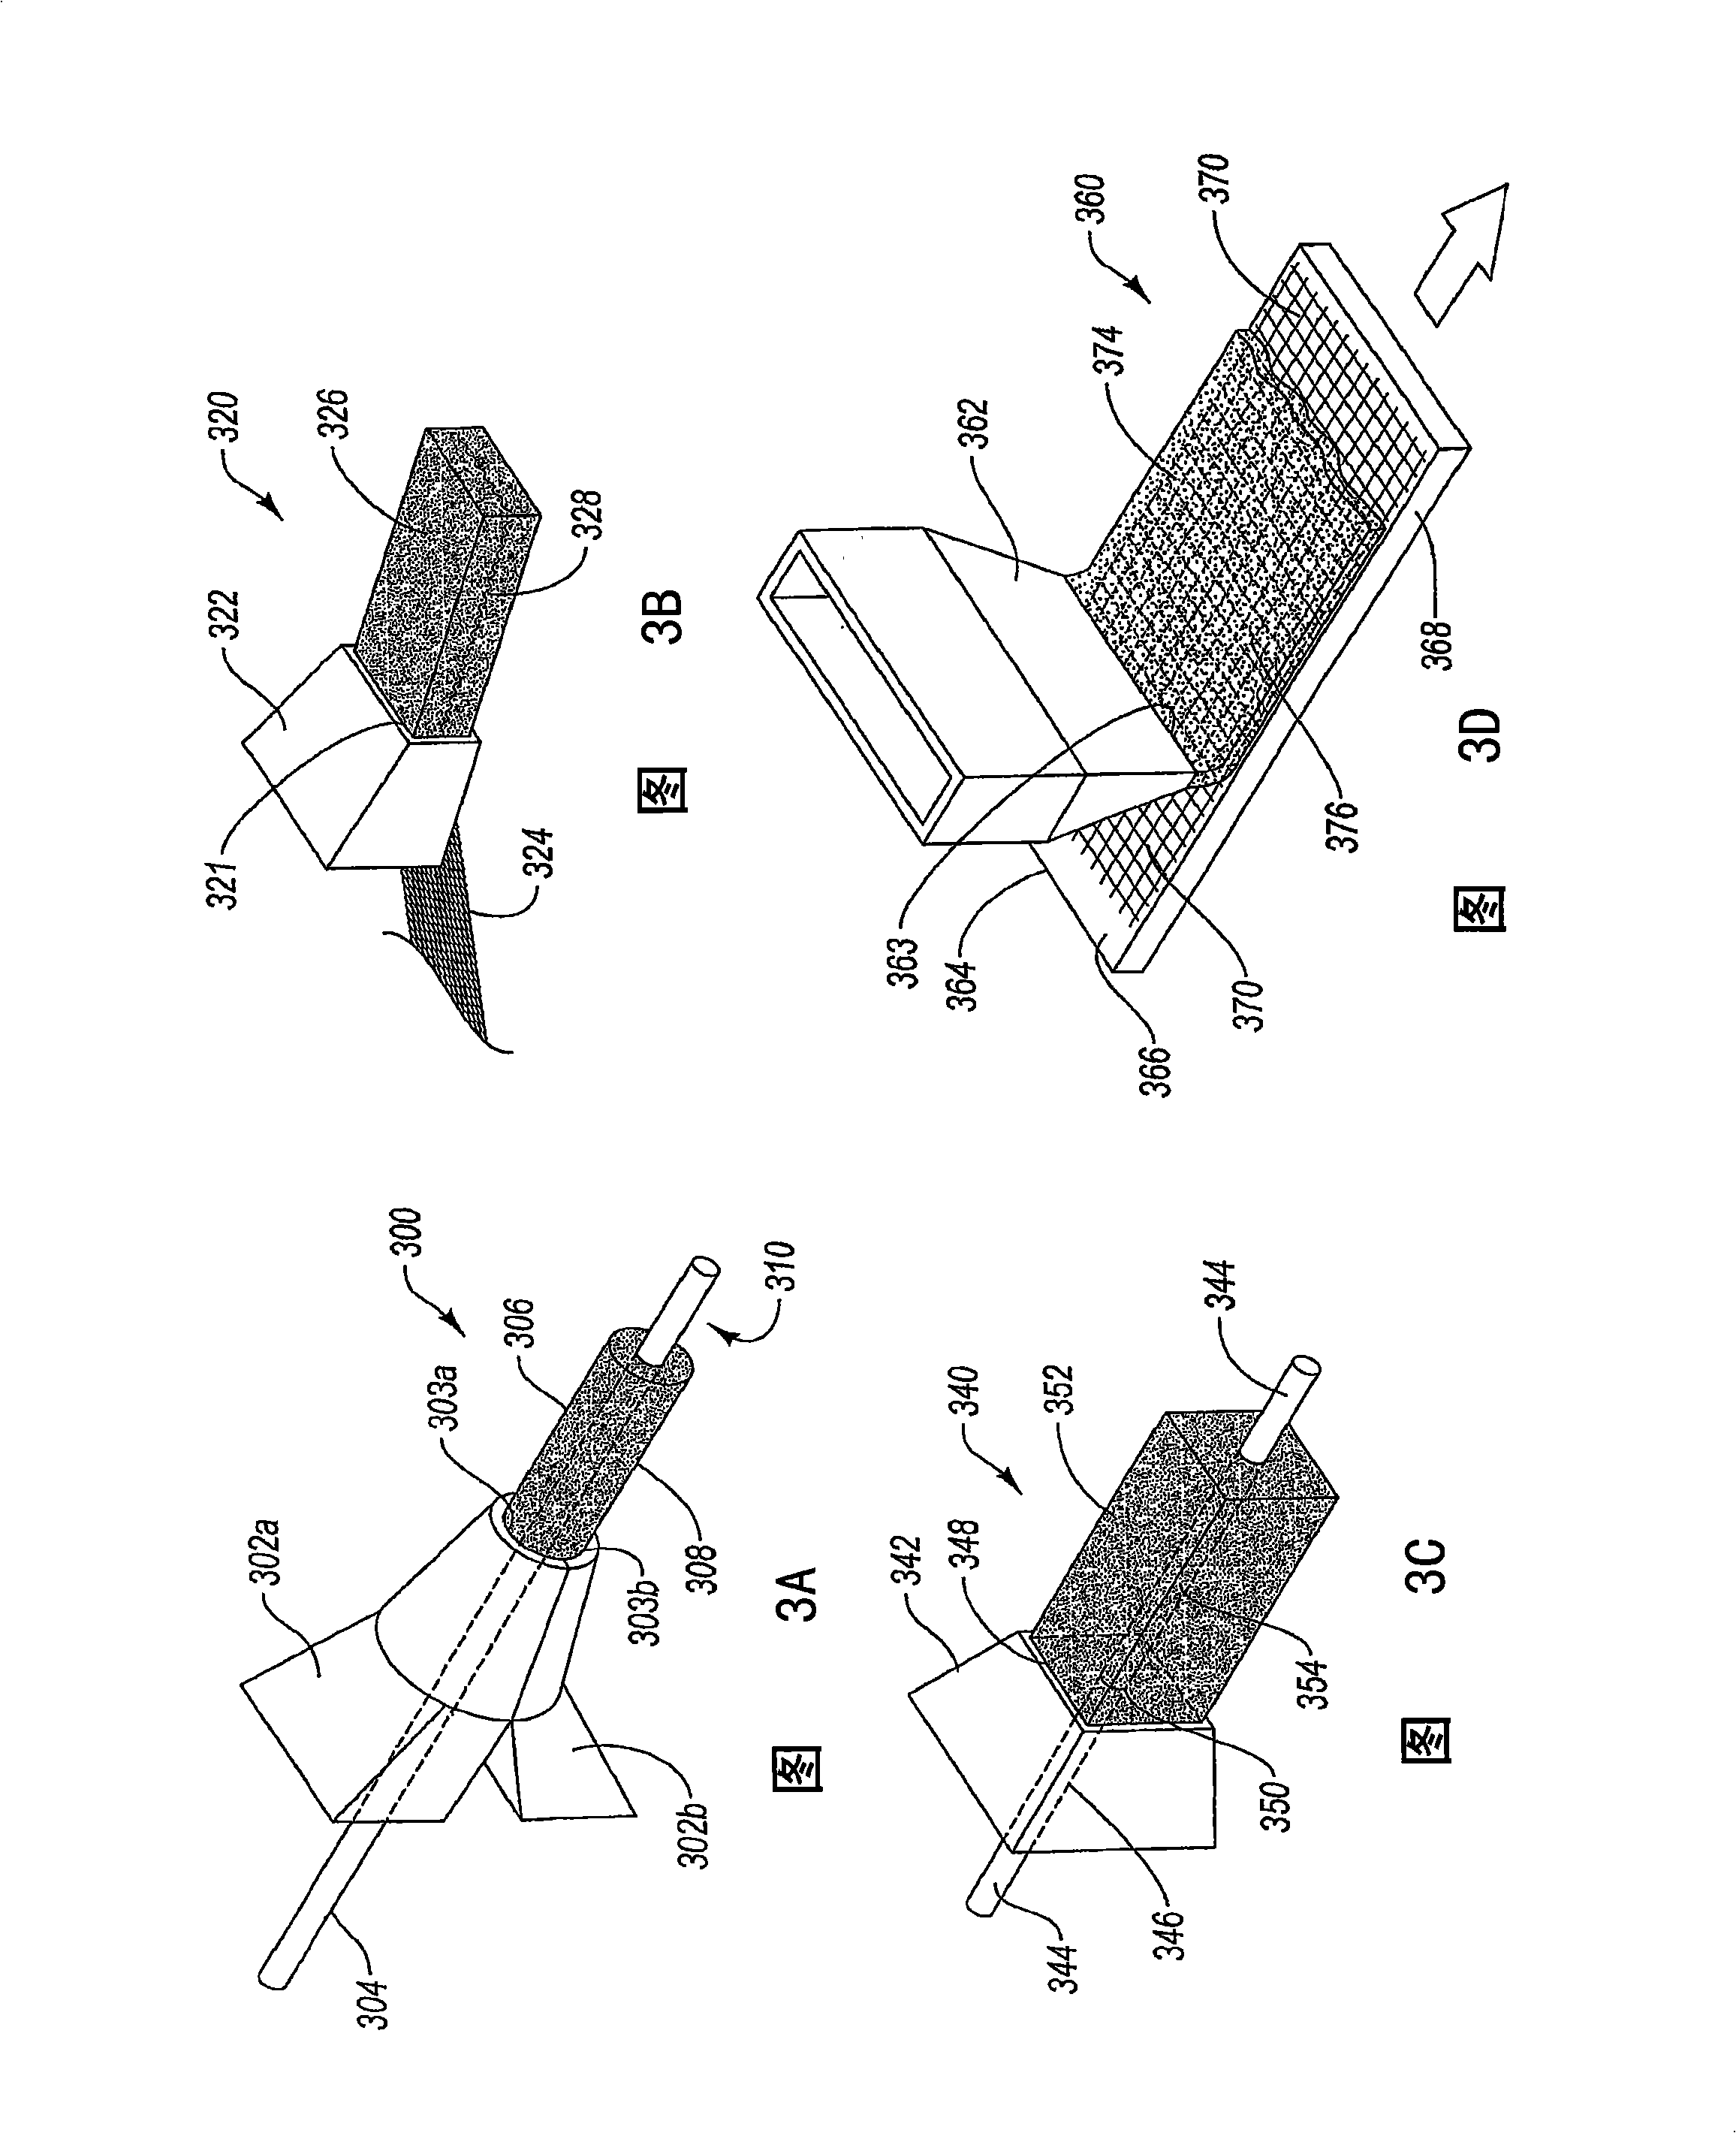 Cementitious composites having wood-like properties and methods of manufacture